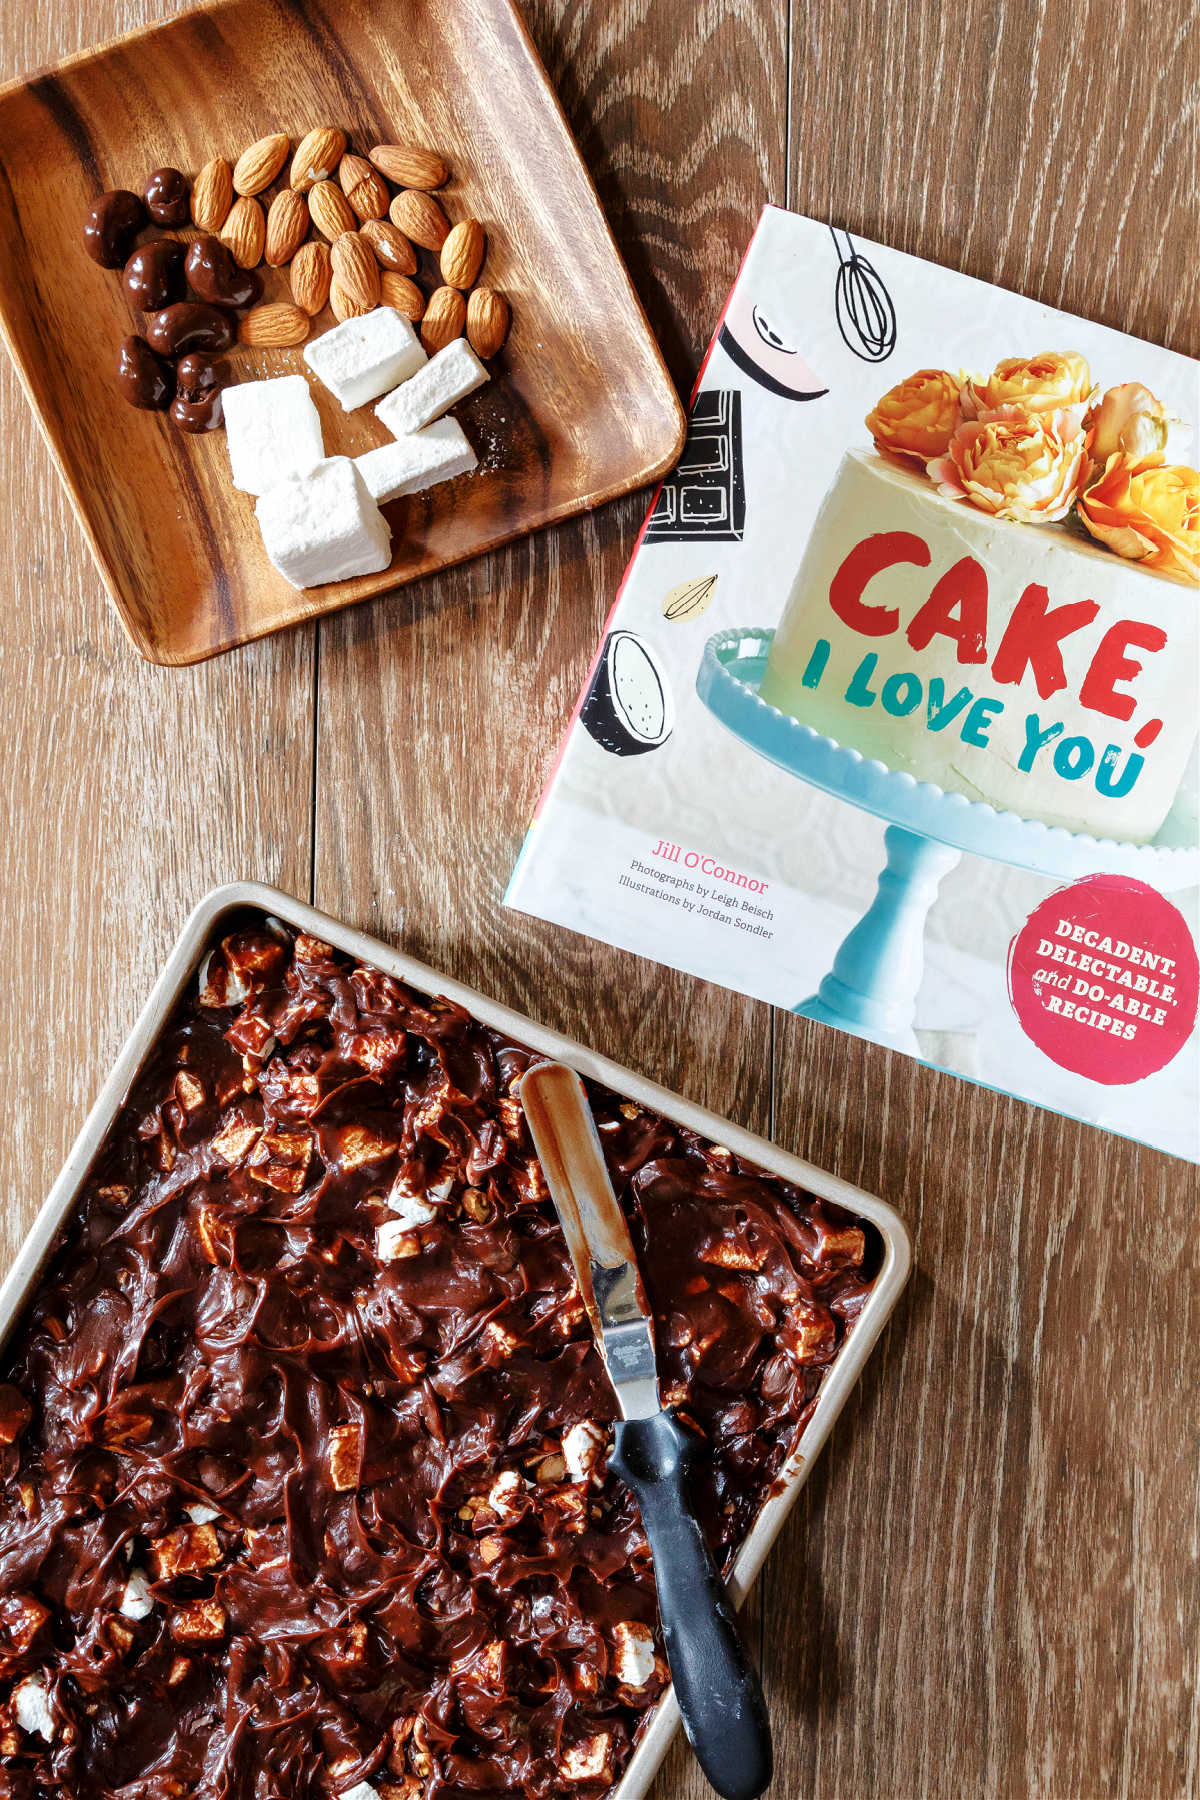 Overhead shot of chocolate sheet cake with rocky road frosting, the cookbook "Cake, I Love you", and a square wooden plate with chocolate covered cashews, toasted almonds, and homemade marshmallows.